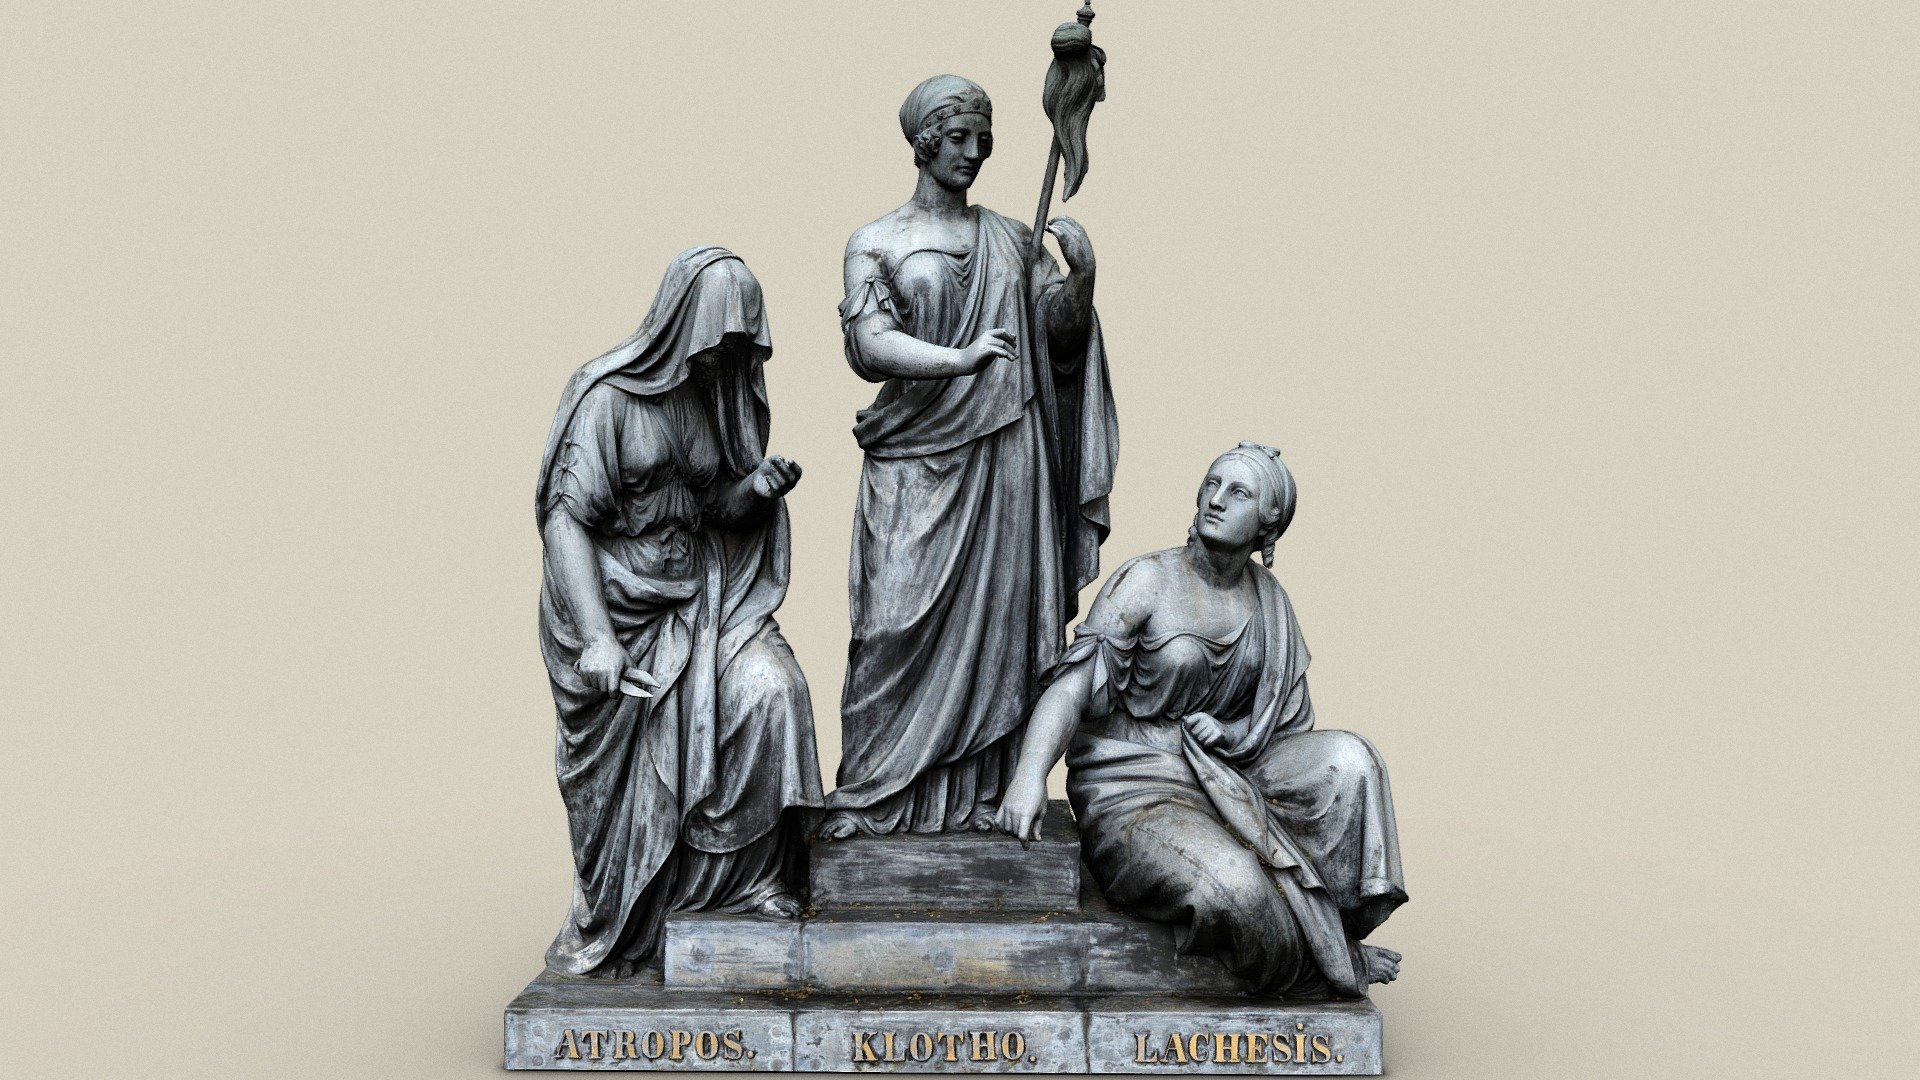 Three goddesses of fate on the grounds of the Heldenberg memorial. In Greek mythology, Moirs are goddesses of fate who were called Parcenes by the Romans. Clotho, the youngest of the three Moirs, has the task of spinning the thread of life, which is measured by Lachesis and cut by Atropos.

The Heldenberg monuments were made of cast zinc. The executing artists were Anton Dietrich, Johann Baptist Feßler and Adam Rammelmayer 3d model